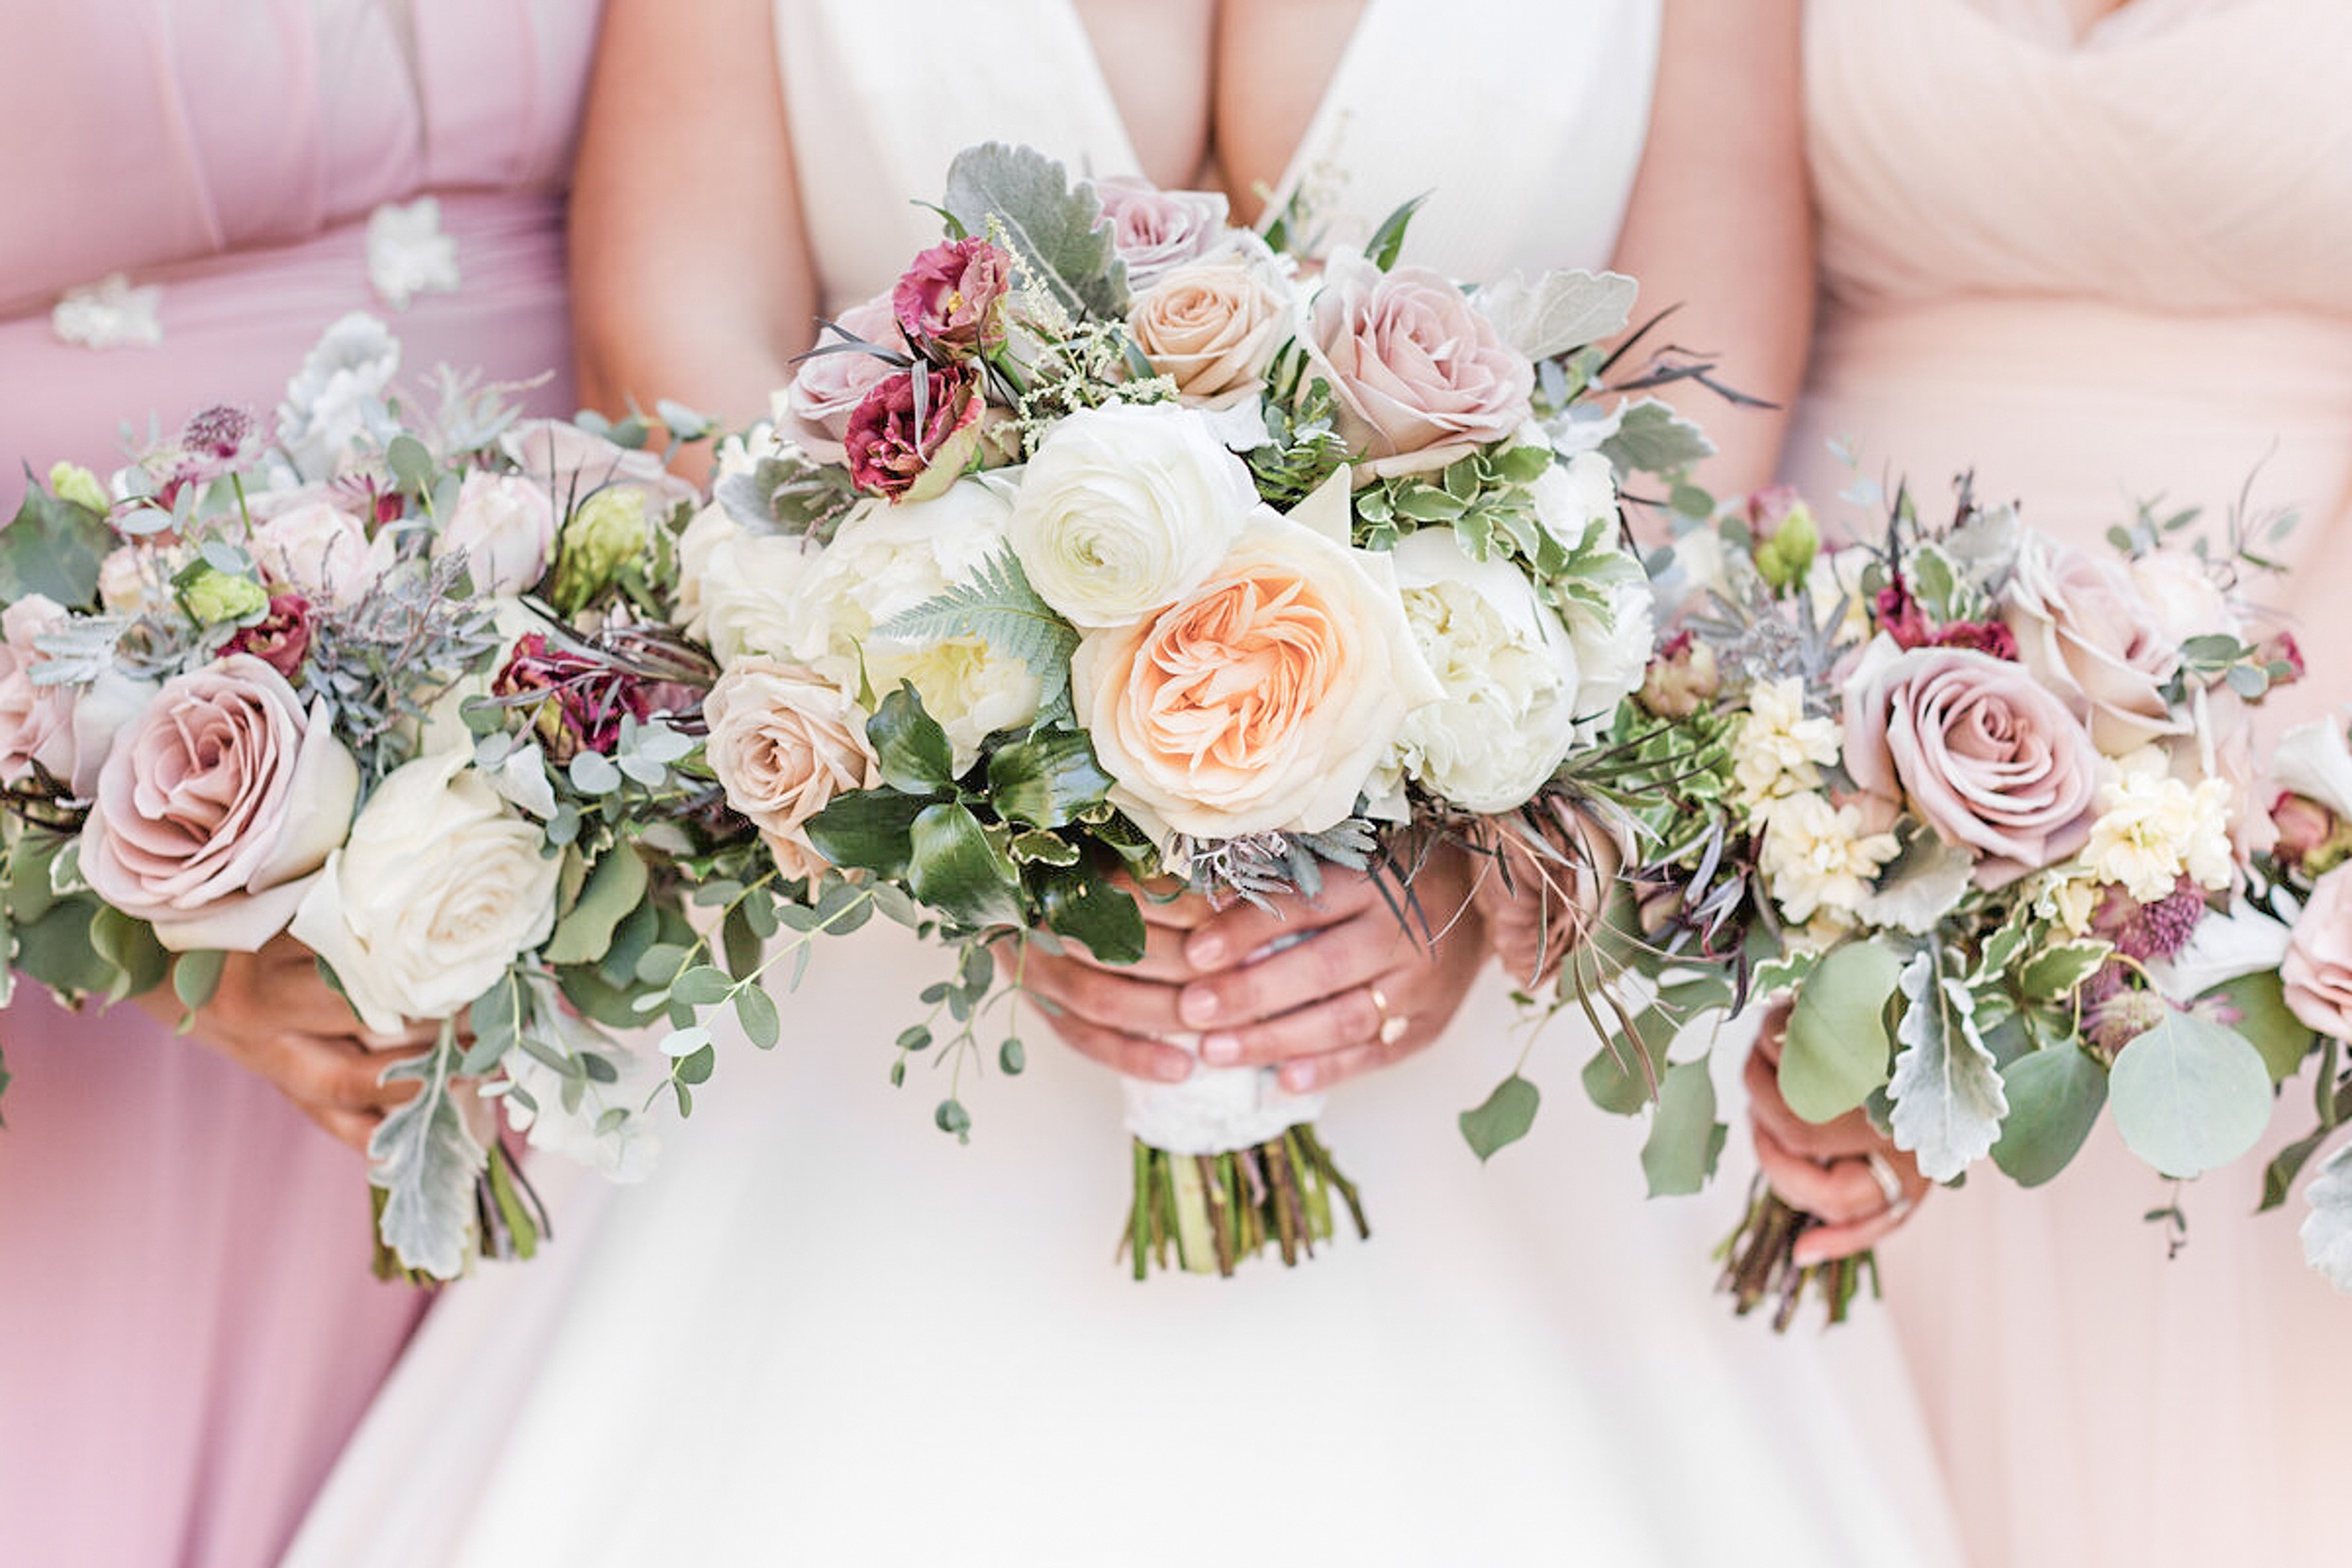 Details of a bride's bouquet with her bridesmaid's